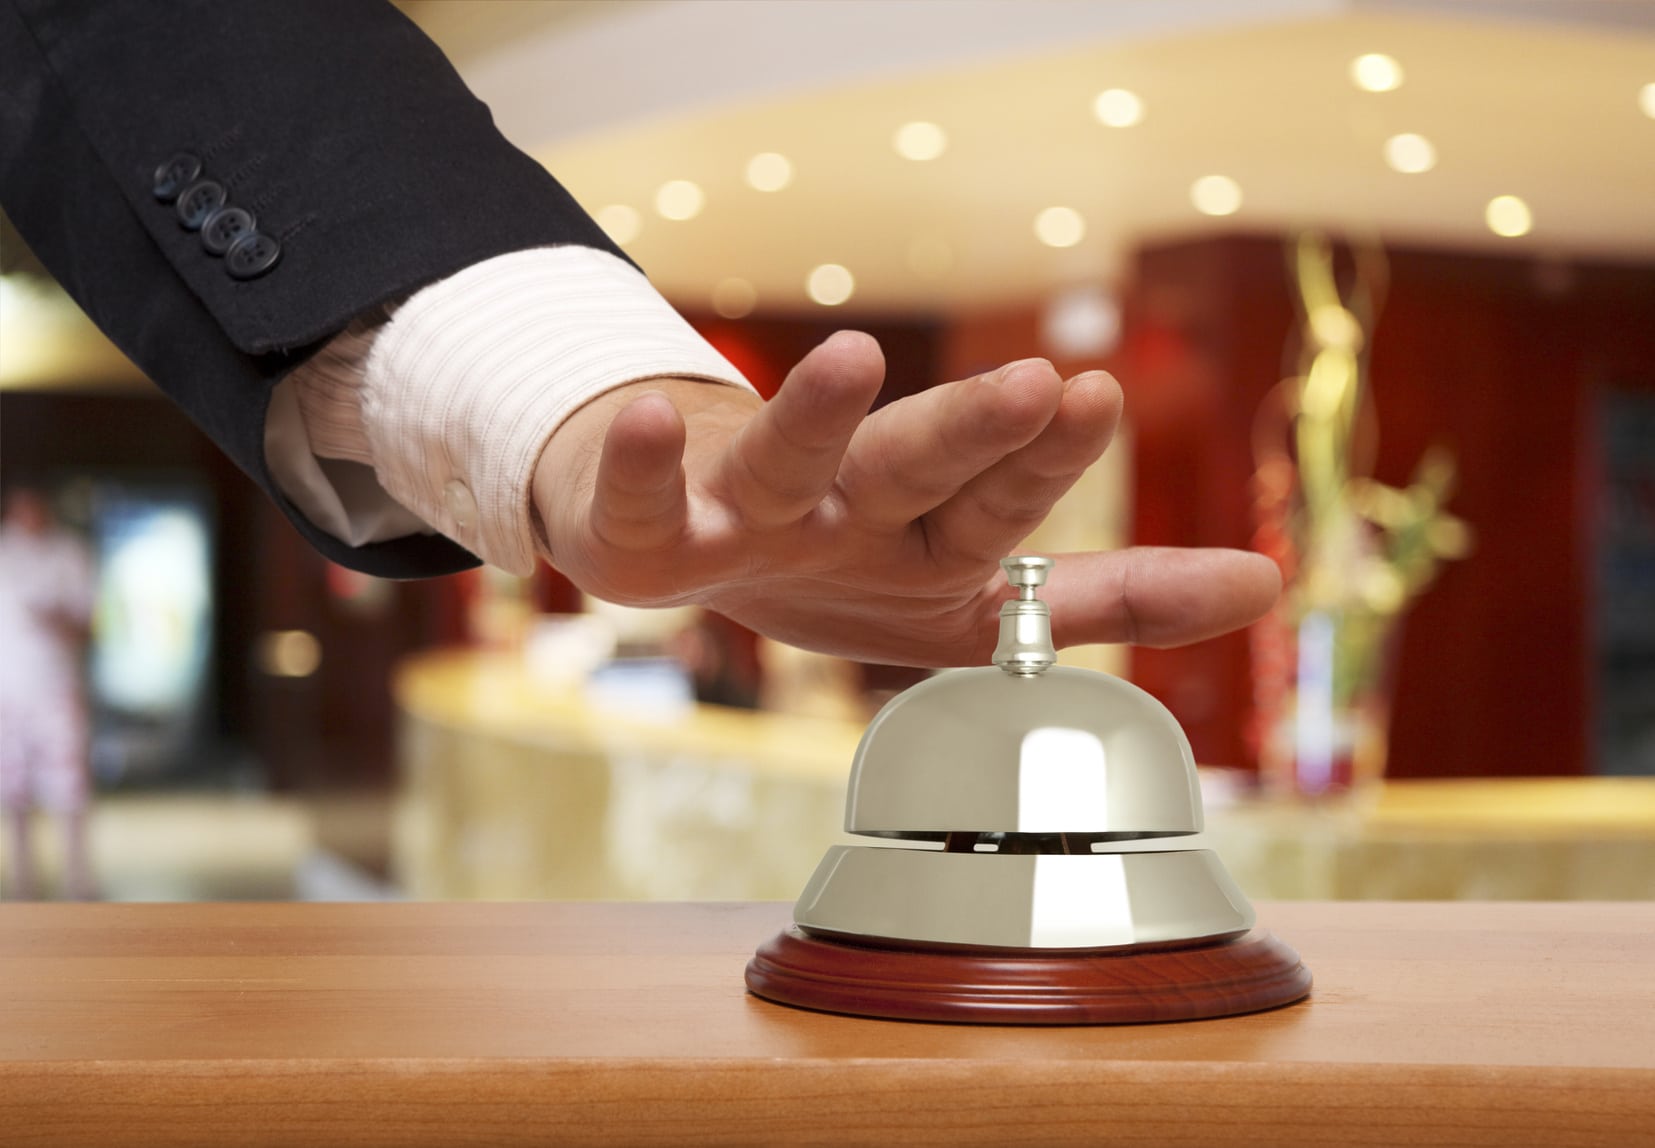 Hotels Speed Up The Check-In Process